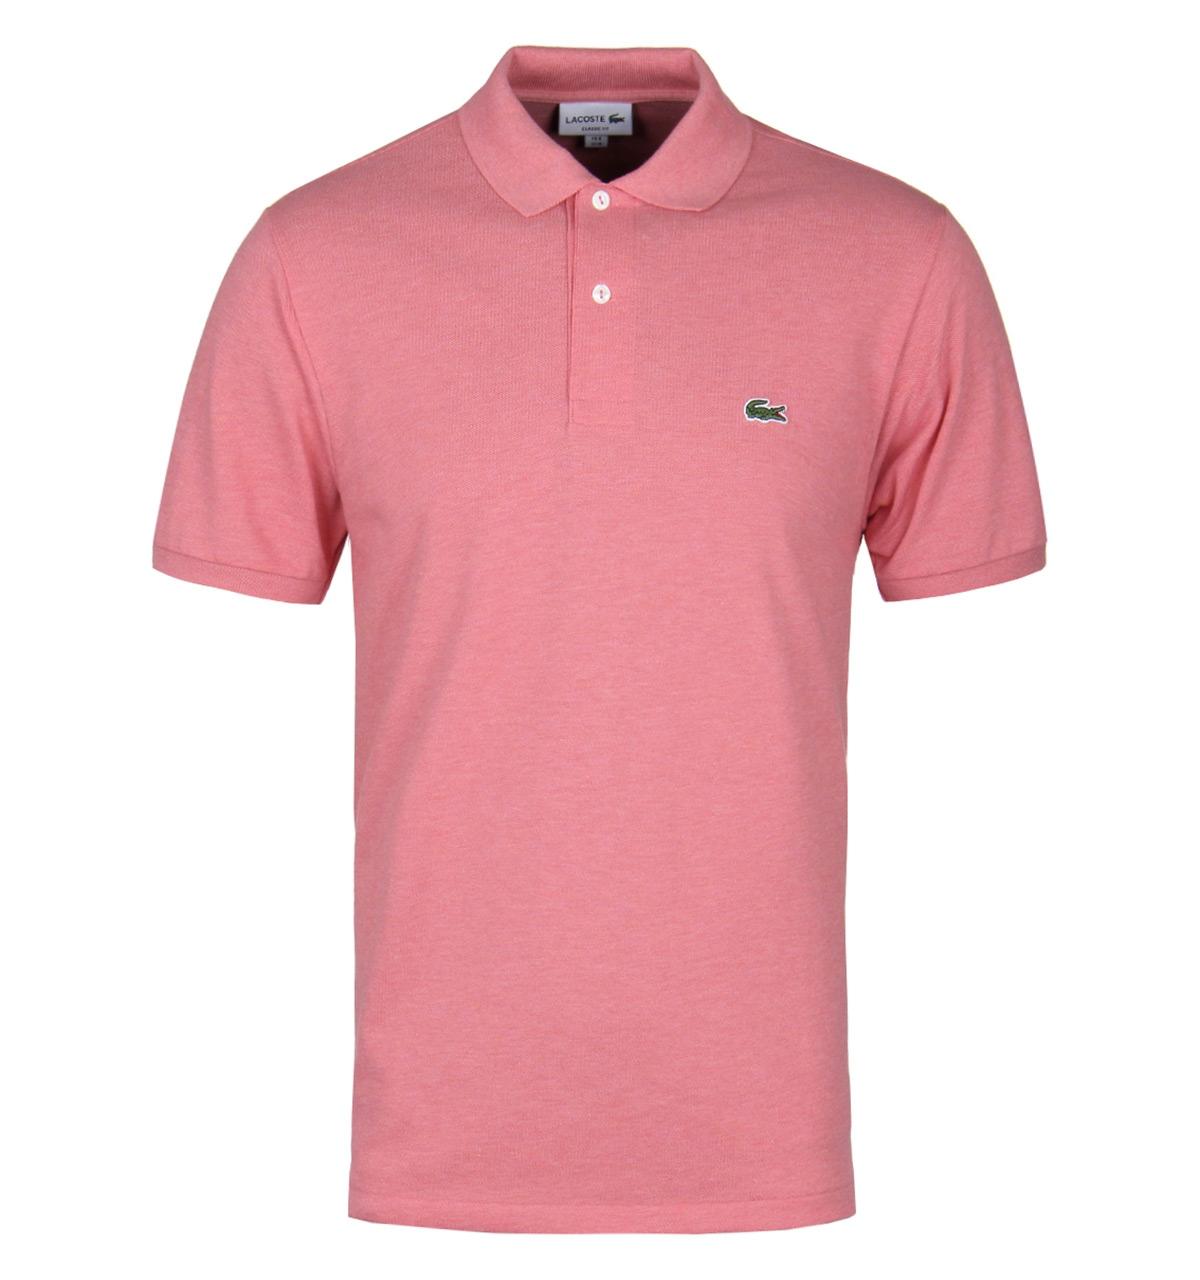 Lyst - Lacoste Rosa Pink Marl Classic Fit Pique Polo Shirt in Pink for ...